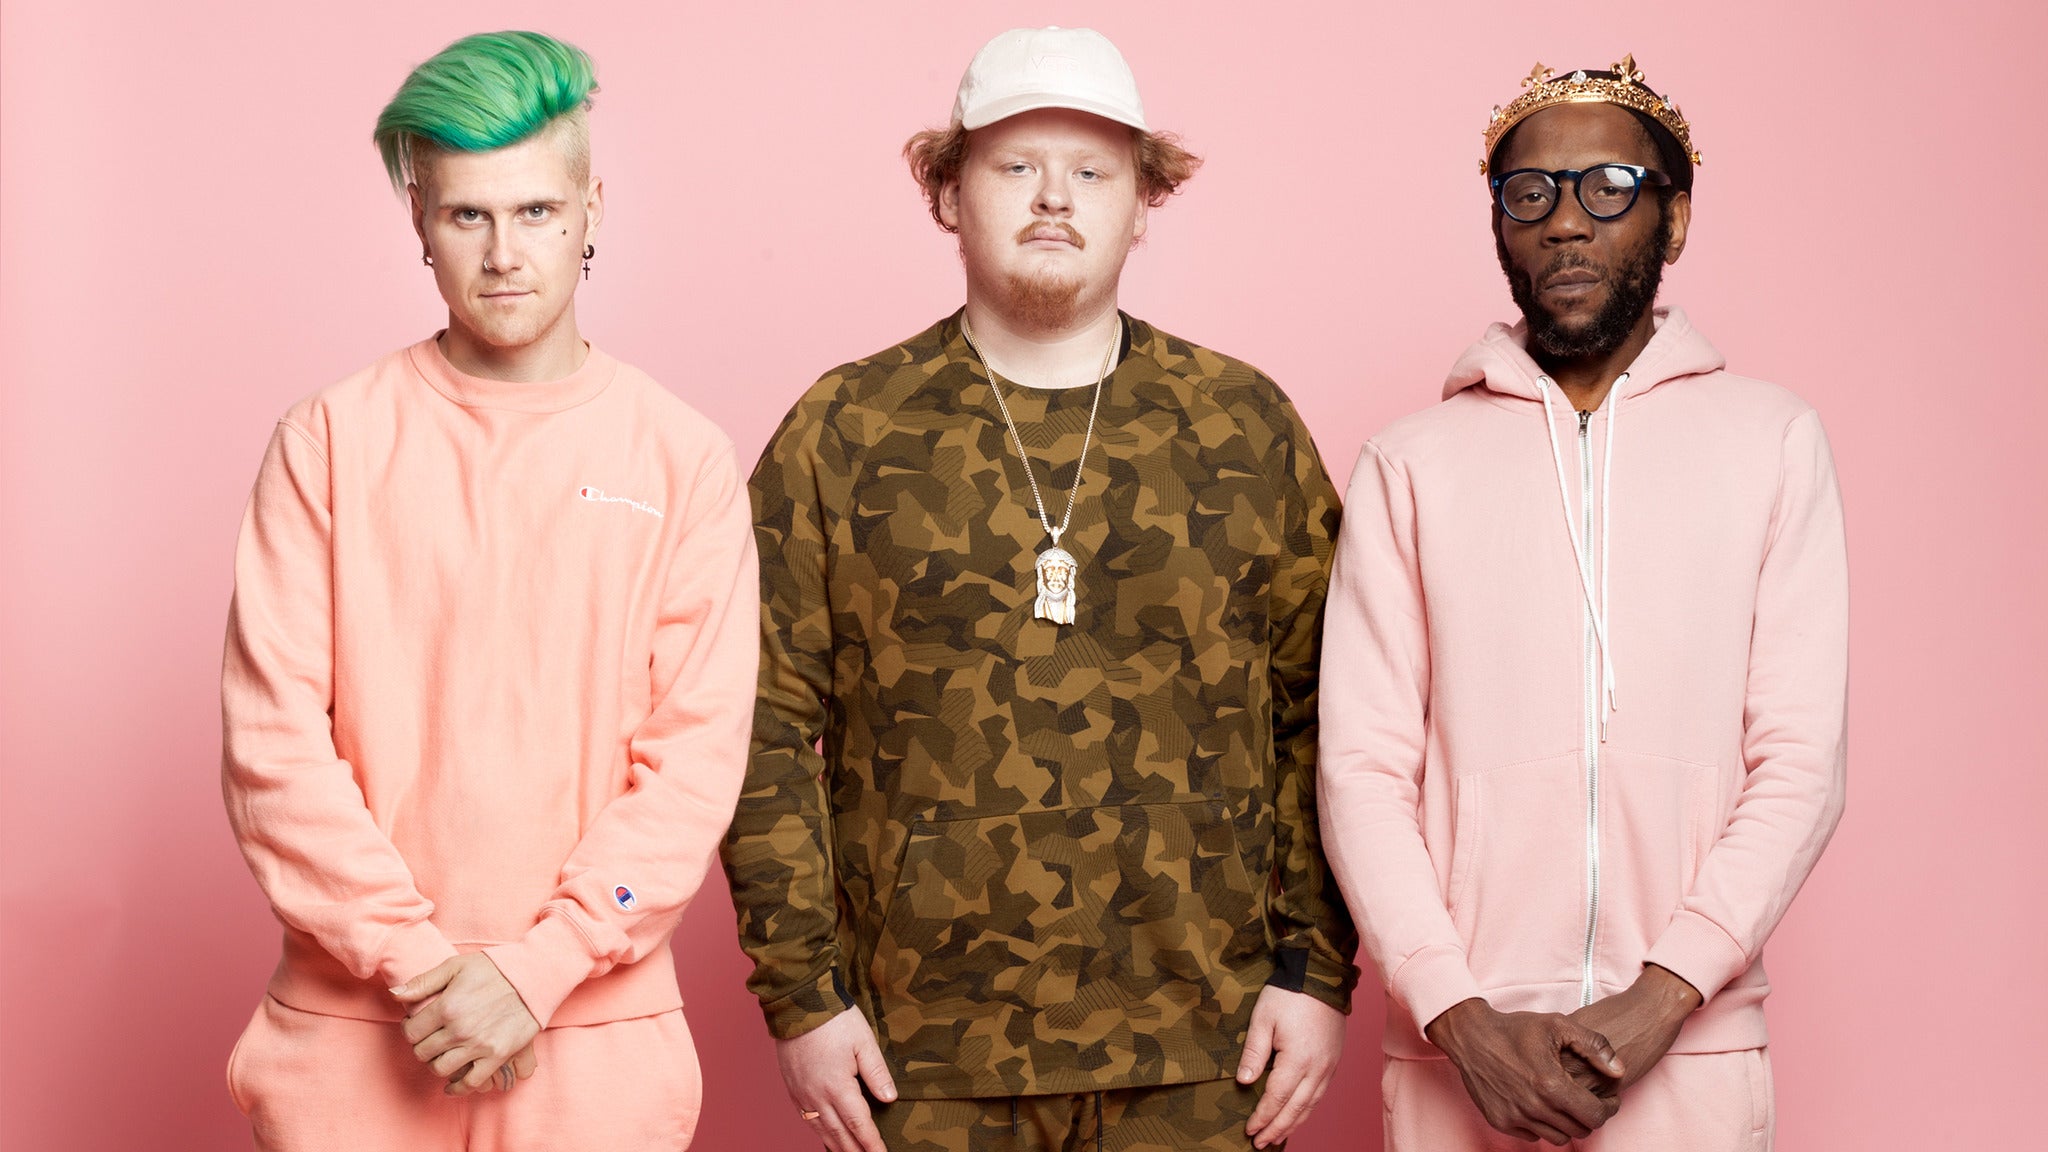 Too Many Zooz - the Zen Arcade Tour in Asbury Park promo photo for Live Nation presale offer code